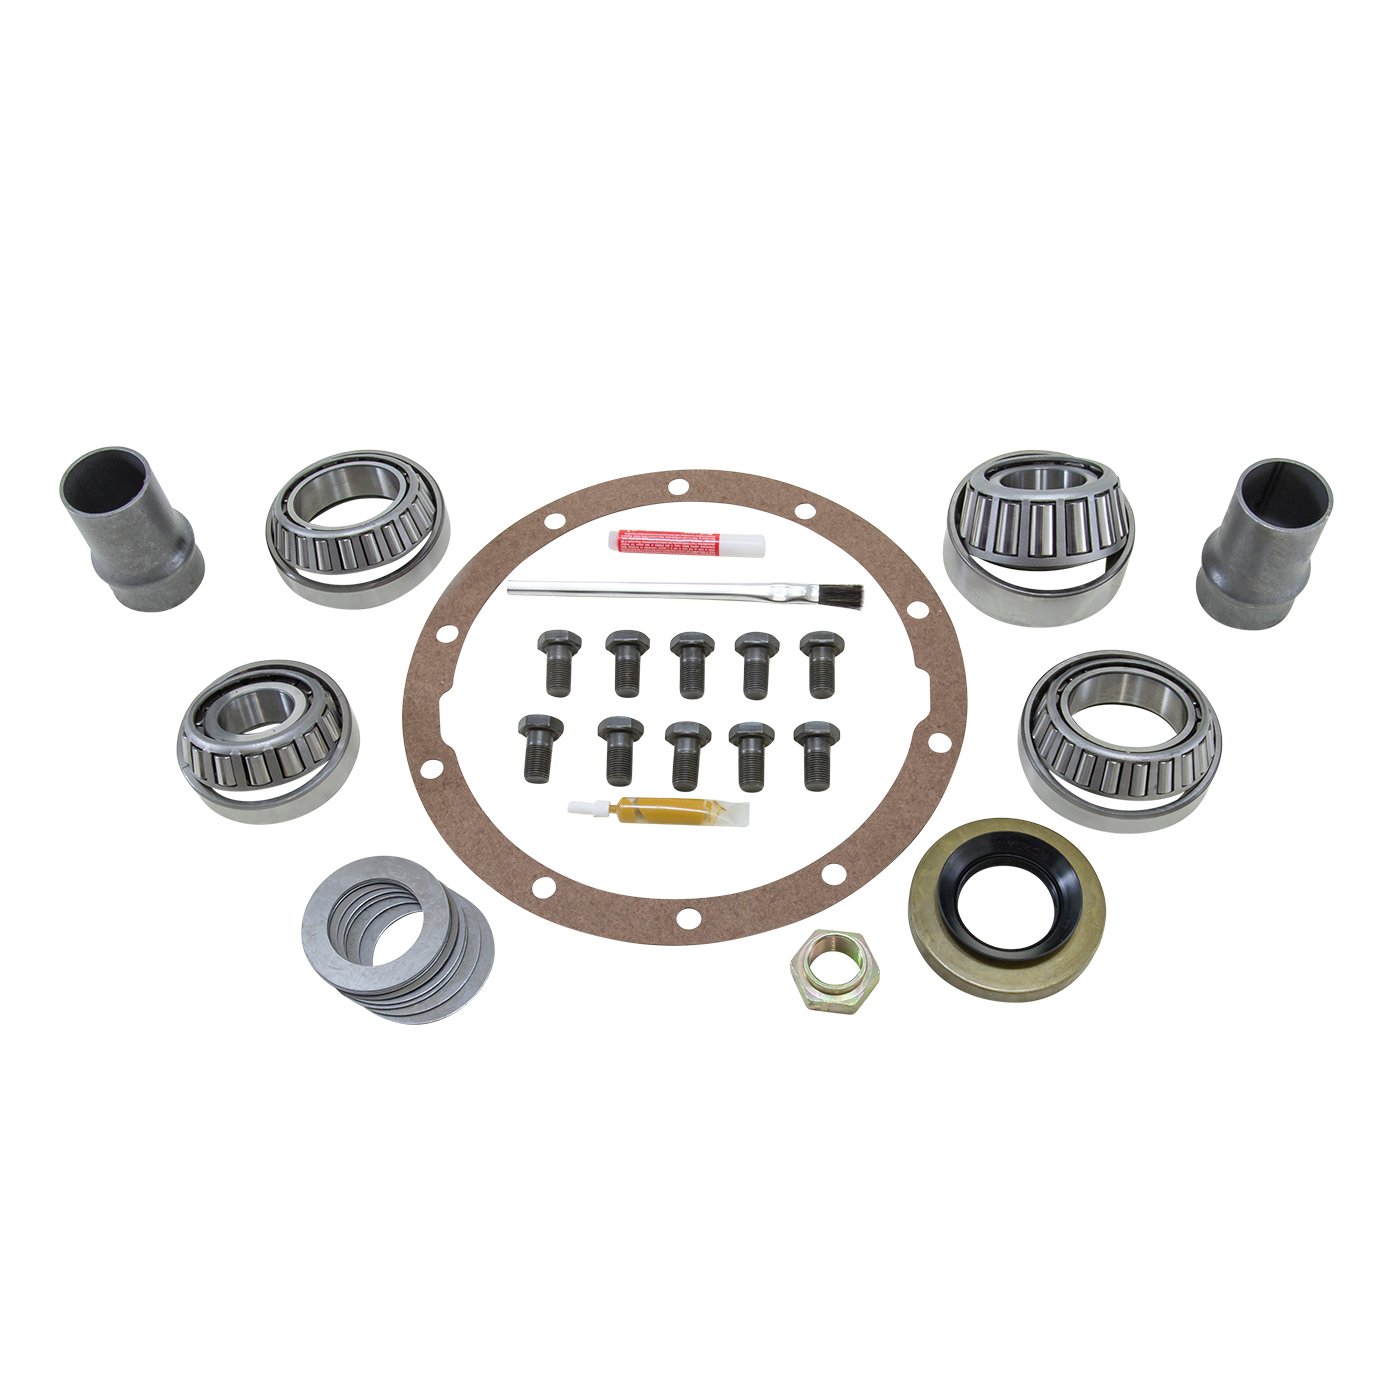 USA Standard ZK T8-B Master Overhaul Kit, For The '86 And Newer Toyota 8 in. Differential